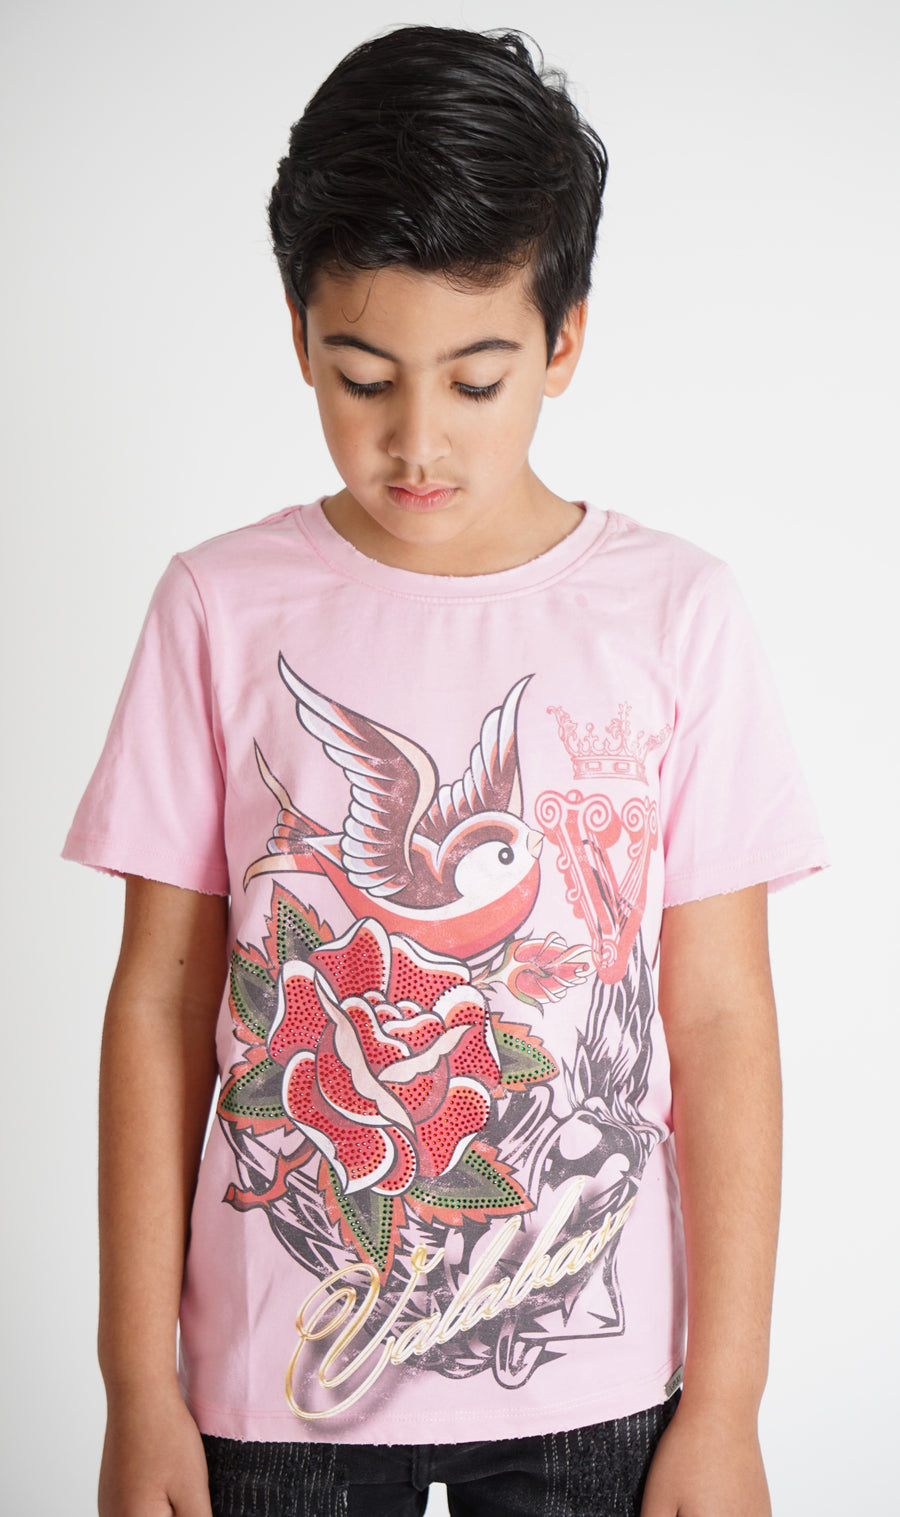 VPLAY TEE “THORNED HEART” VINTAGE PINK